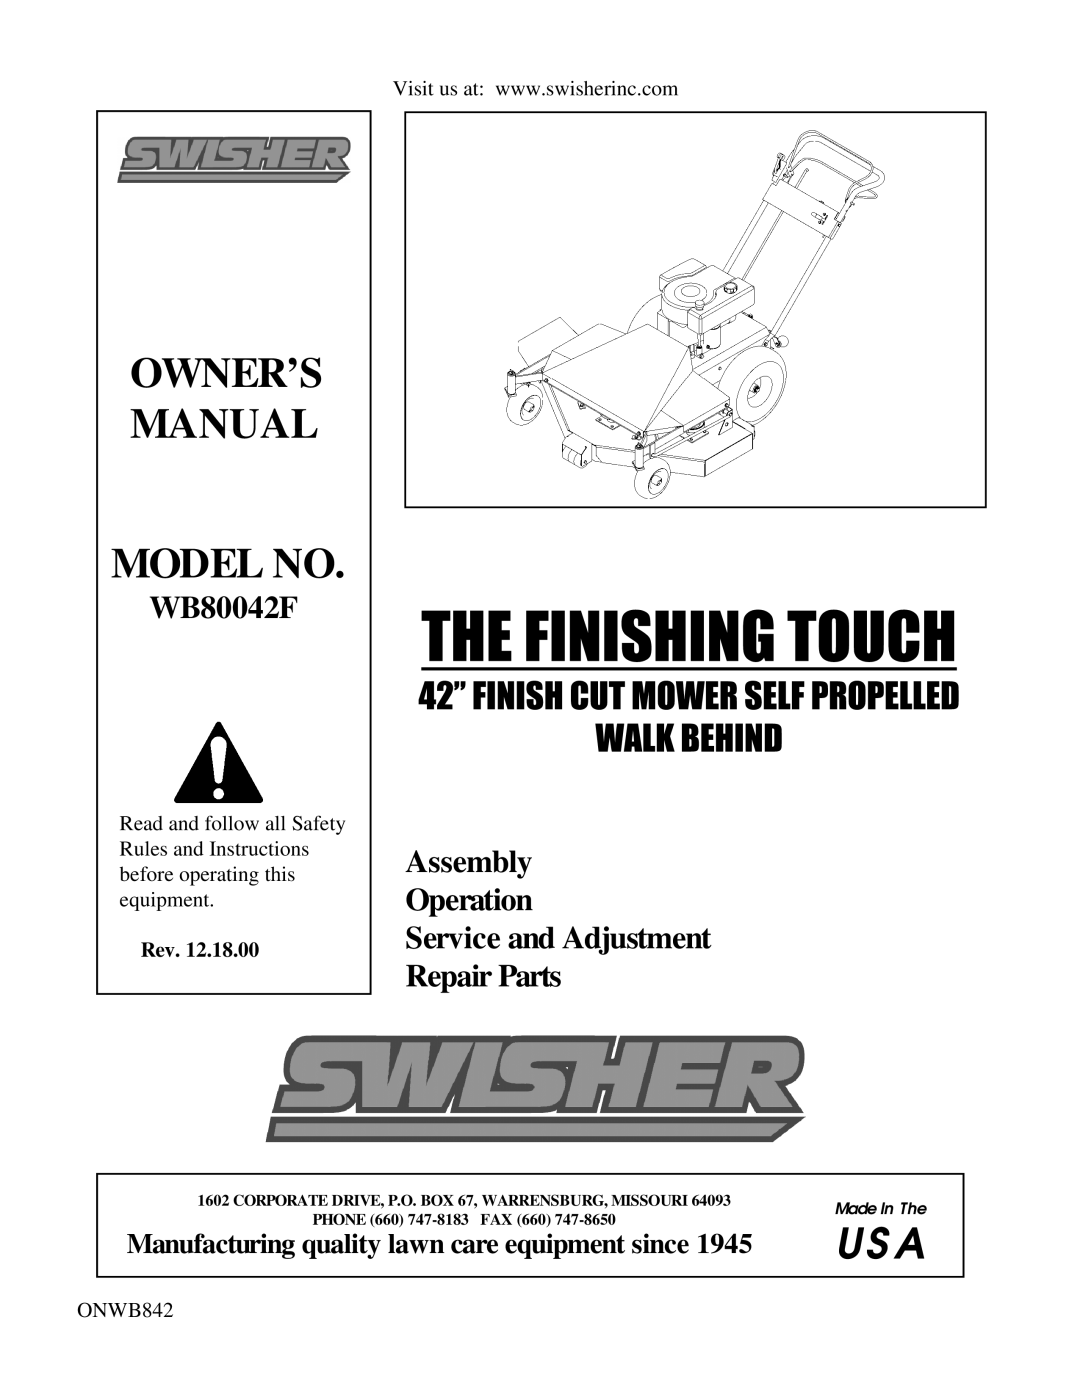 Swisher WB80042F owner manual Model No, Assembly Operation Service and Adjustment, Repair Parts, Rev, ONWB842, Us A 